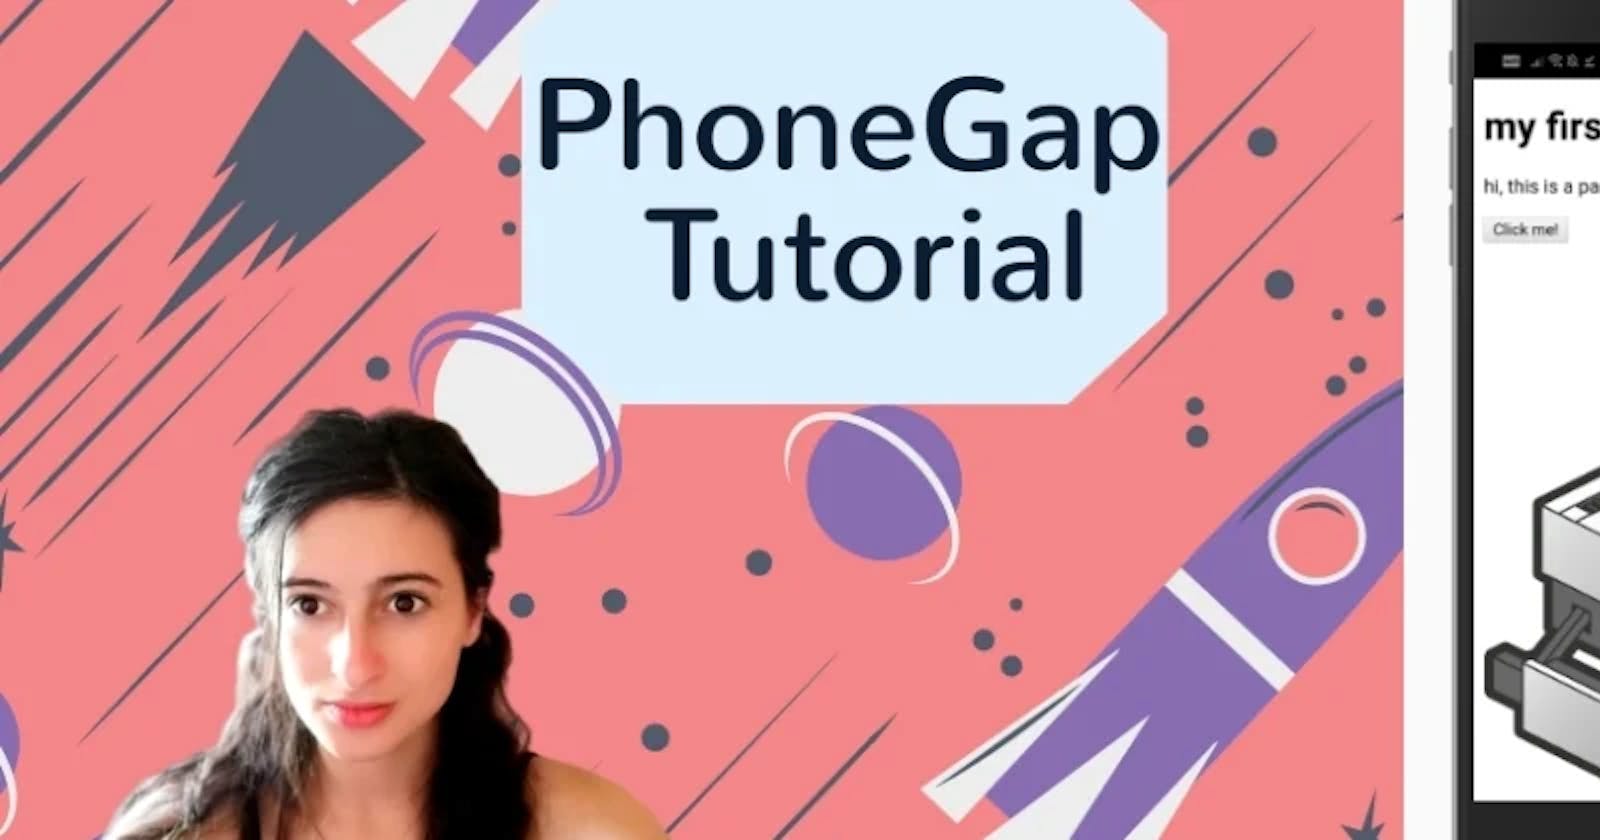 How To Create An App In 10min with PhoneGap + Tips